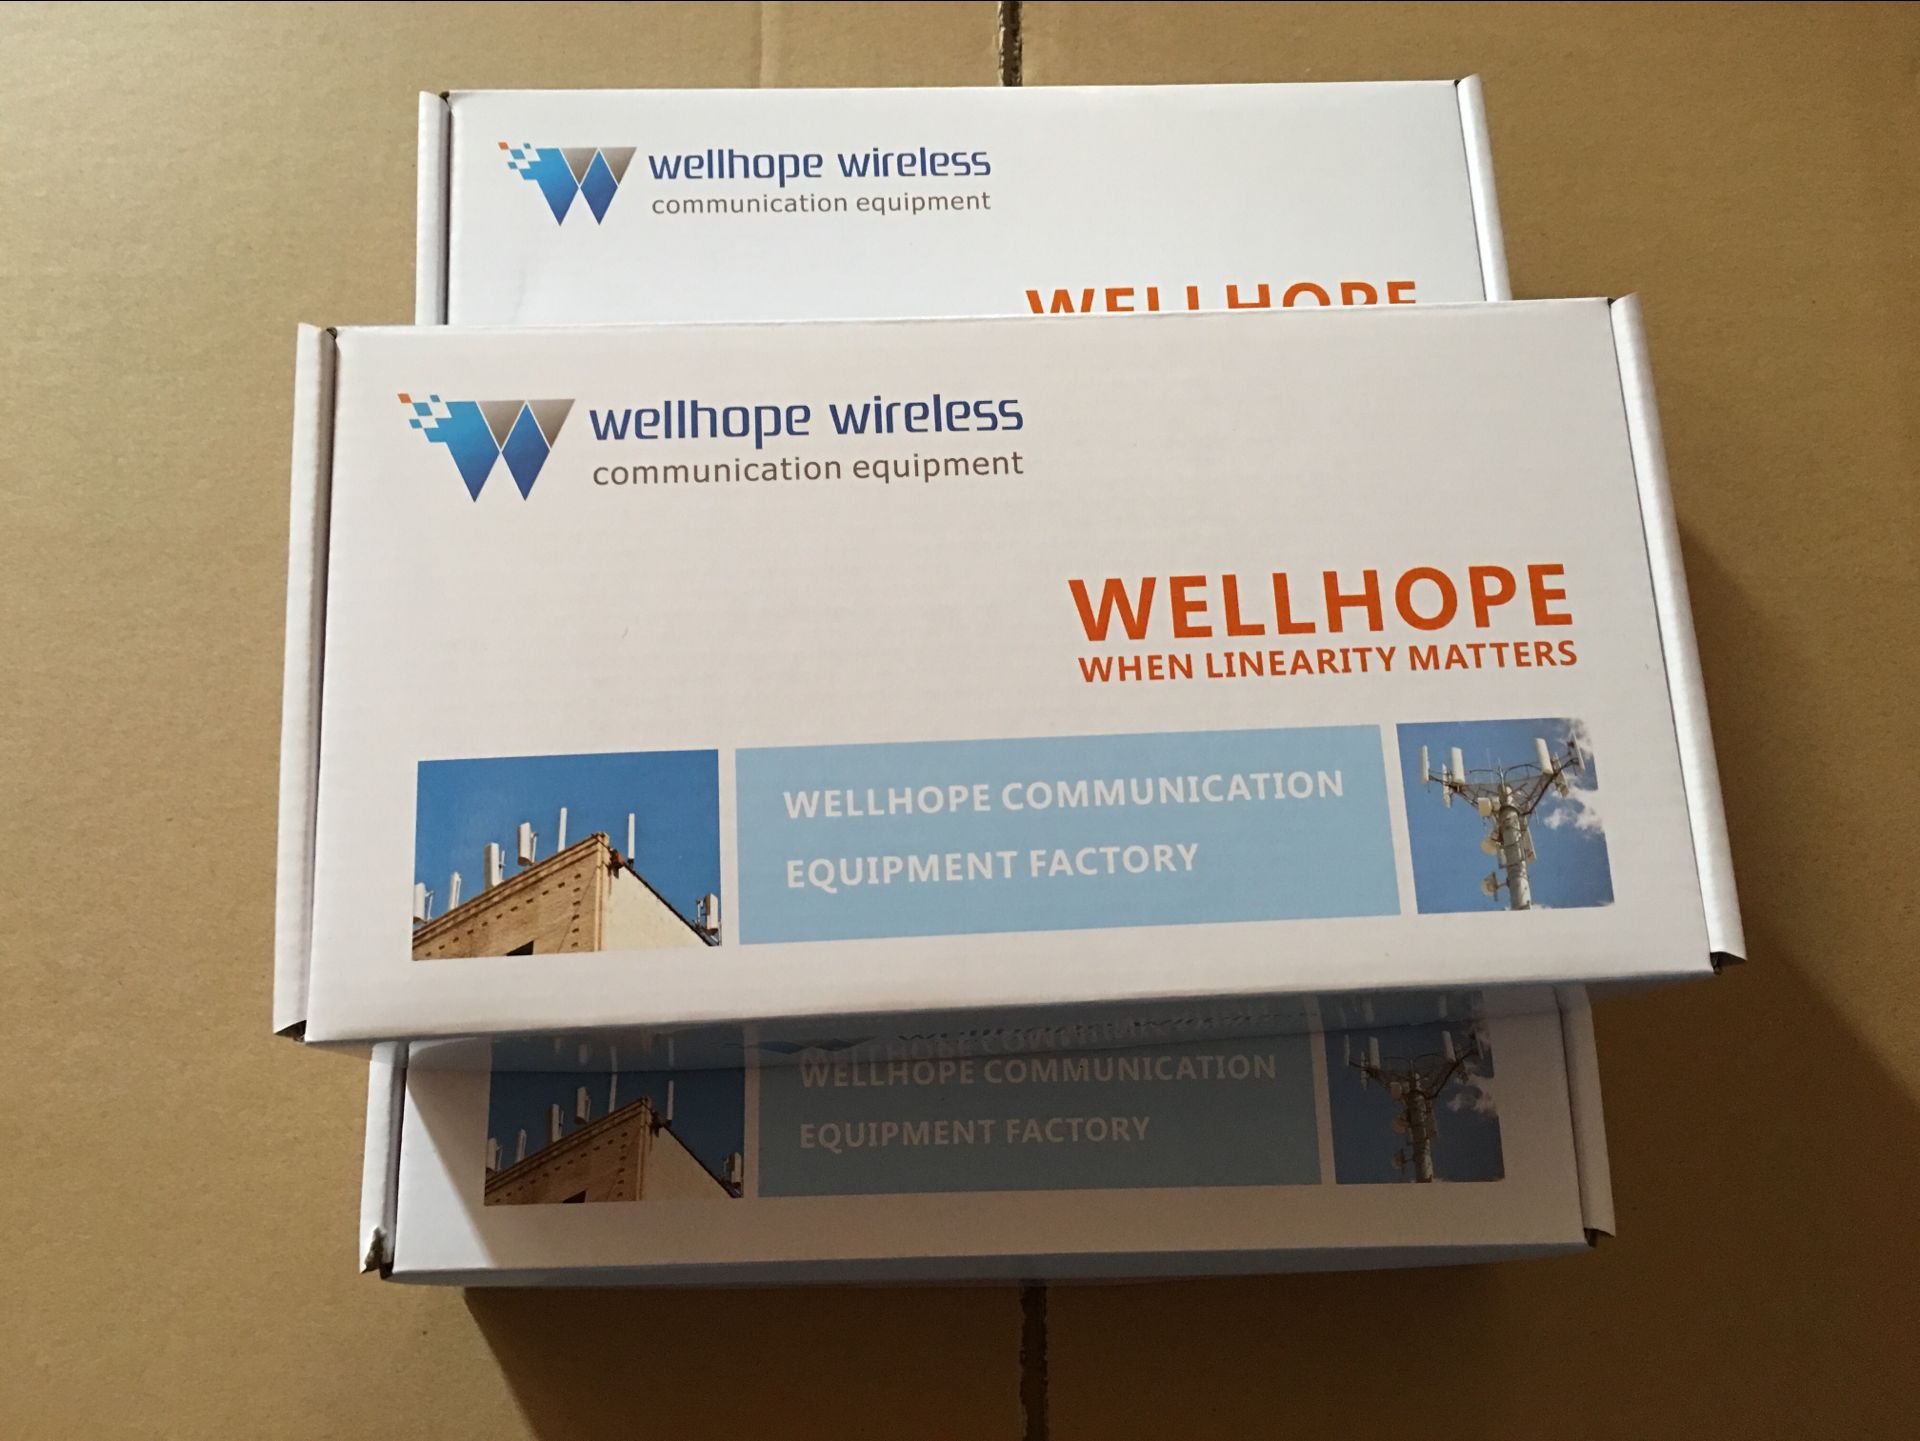  2017/7/26 wellhope draadloze 2000pcs 2.4GHz antenne WH-2.4GHz-02